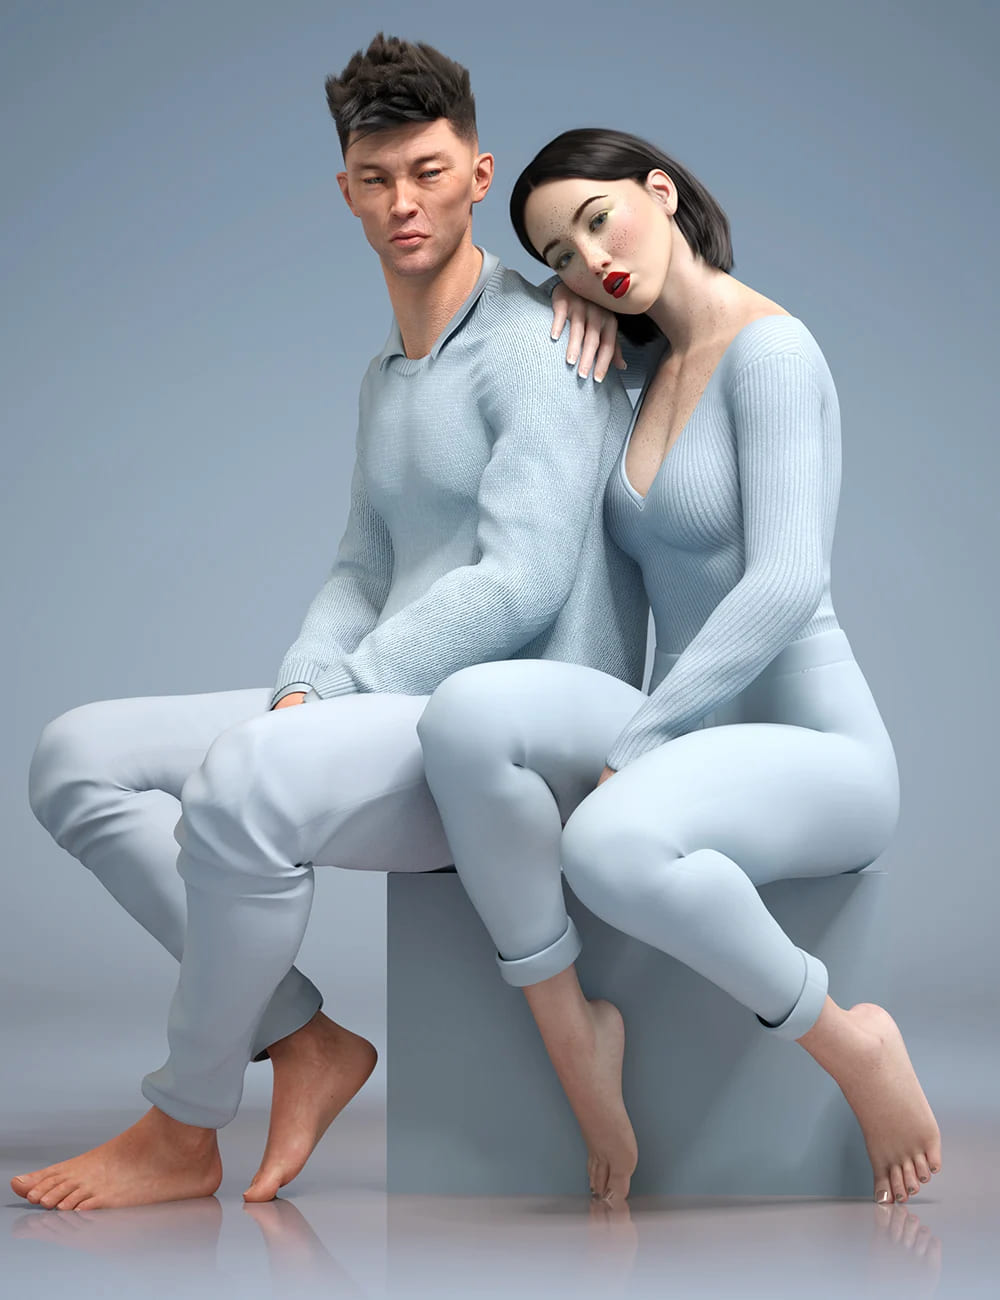 Lookbook for Two Poses and Expressions for Genesis 8.1 Male and Female_DAZ3DDL